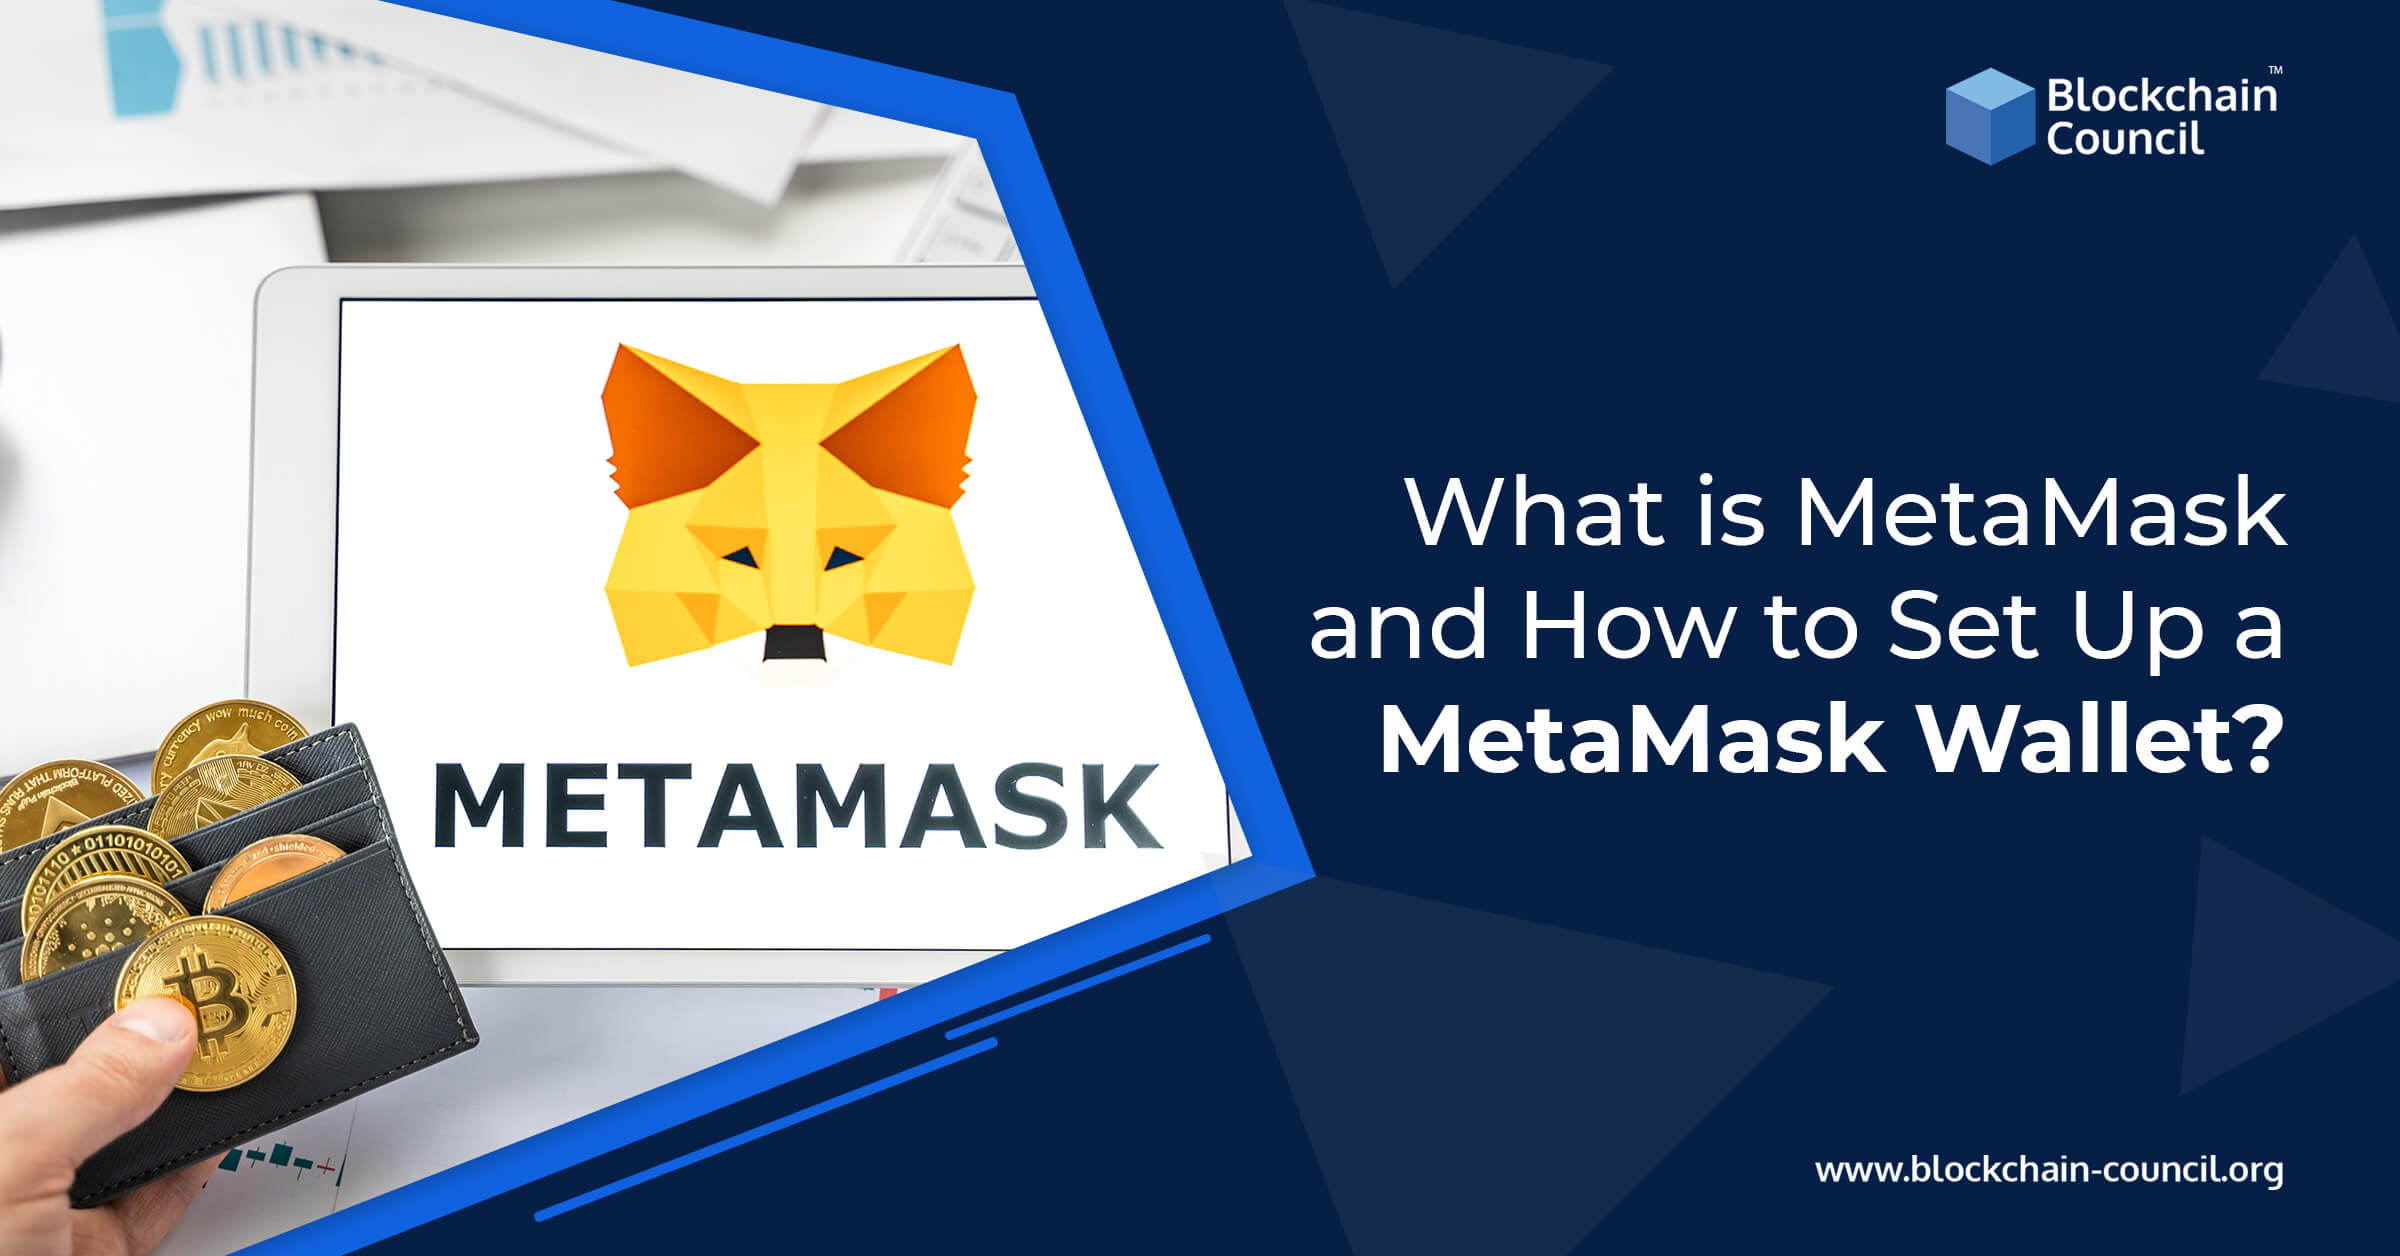 What is MetaMask and How to Set Up a MetaMask Wallet